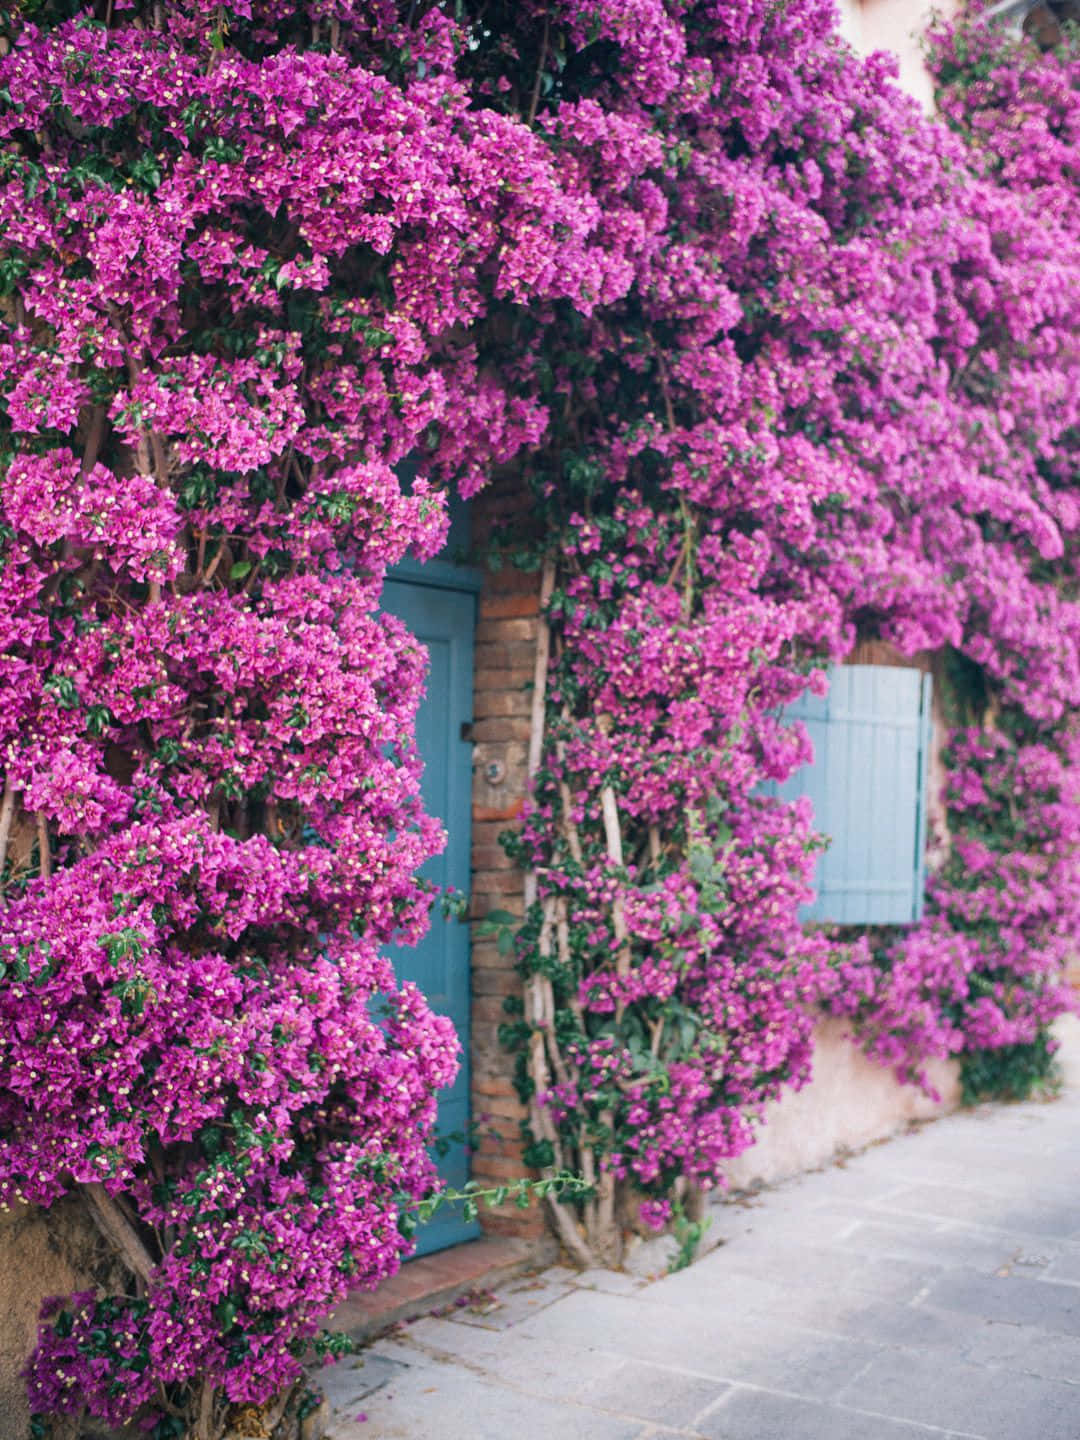 A bright and vibrant display of Bougainvilleas